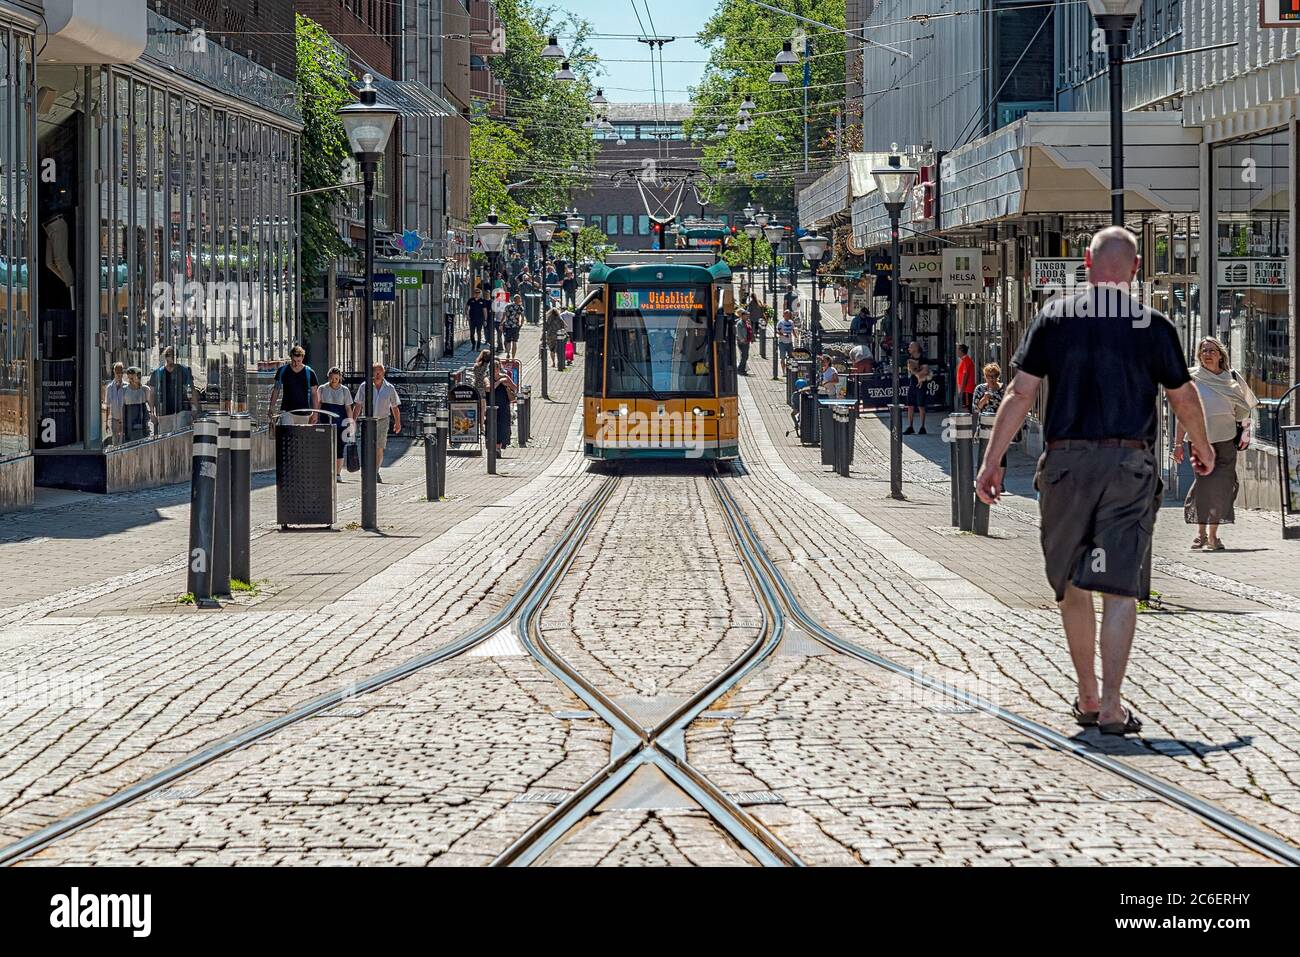 NORRKOPING, SWEDEN - JUNE 13, 2020: The Norrkoping tramway network is a system of trams forming a principal part of the public transport services in N Stock Photo